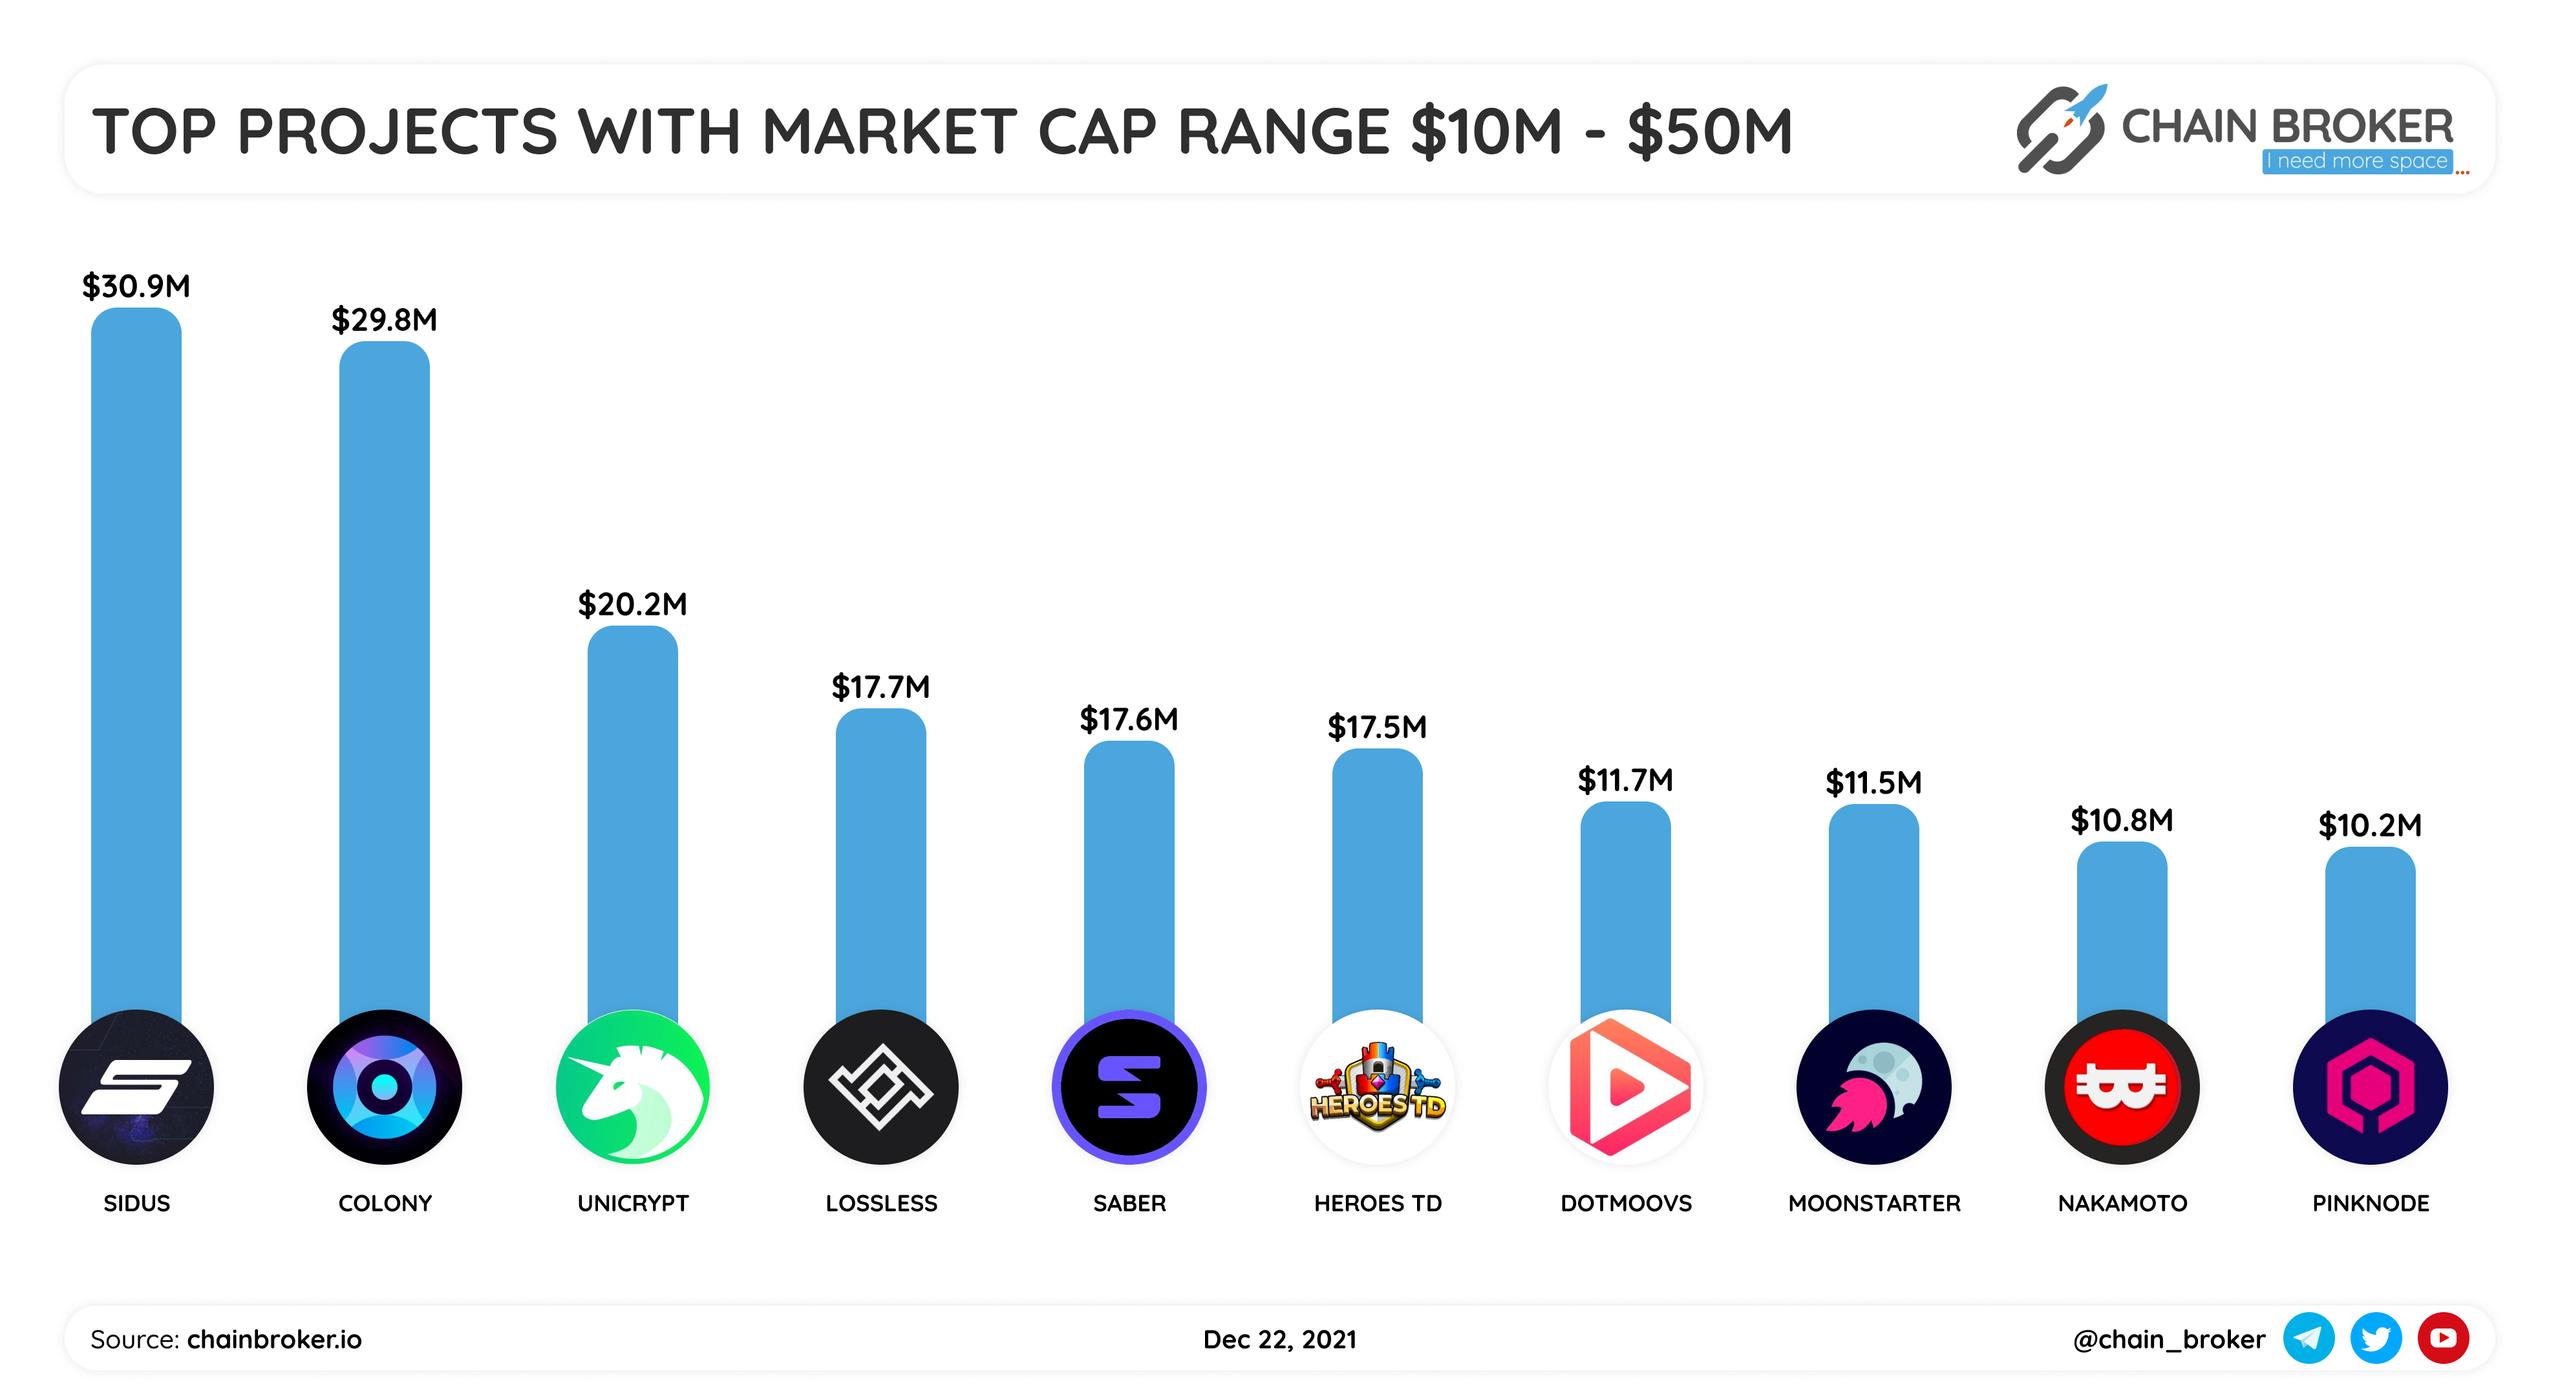 Top projects with market cap range $10M-$50M